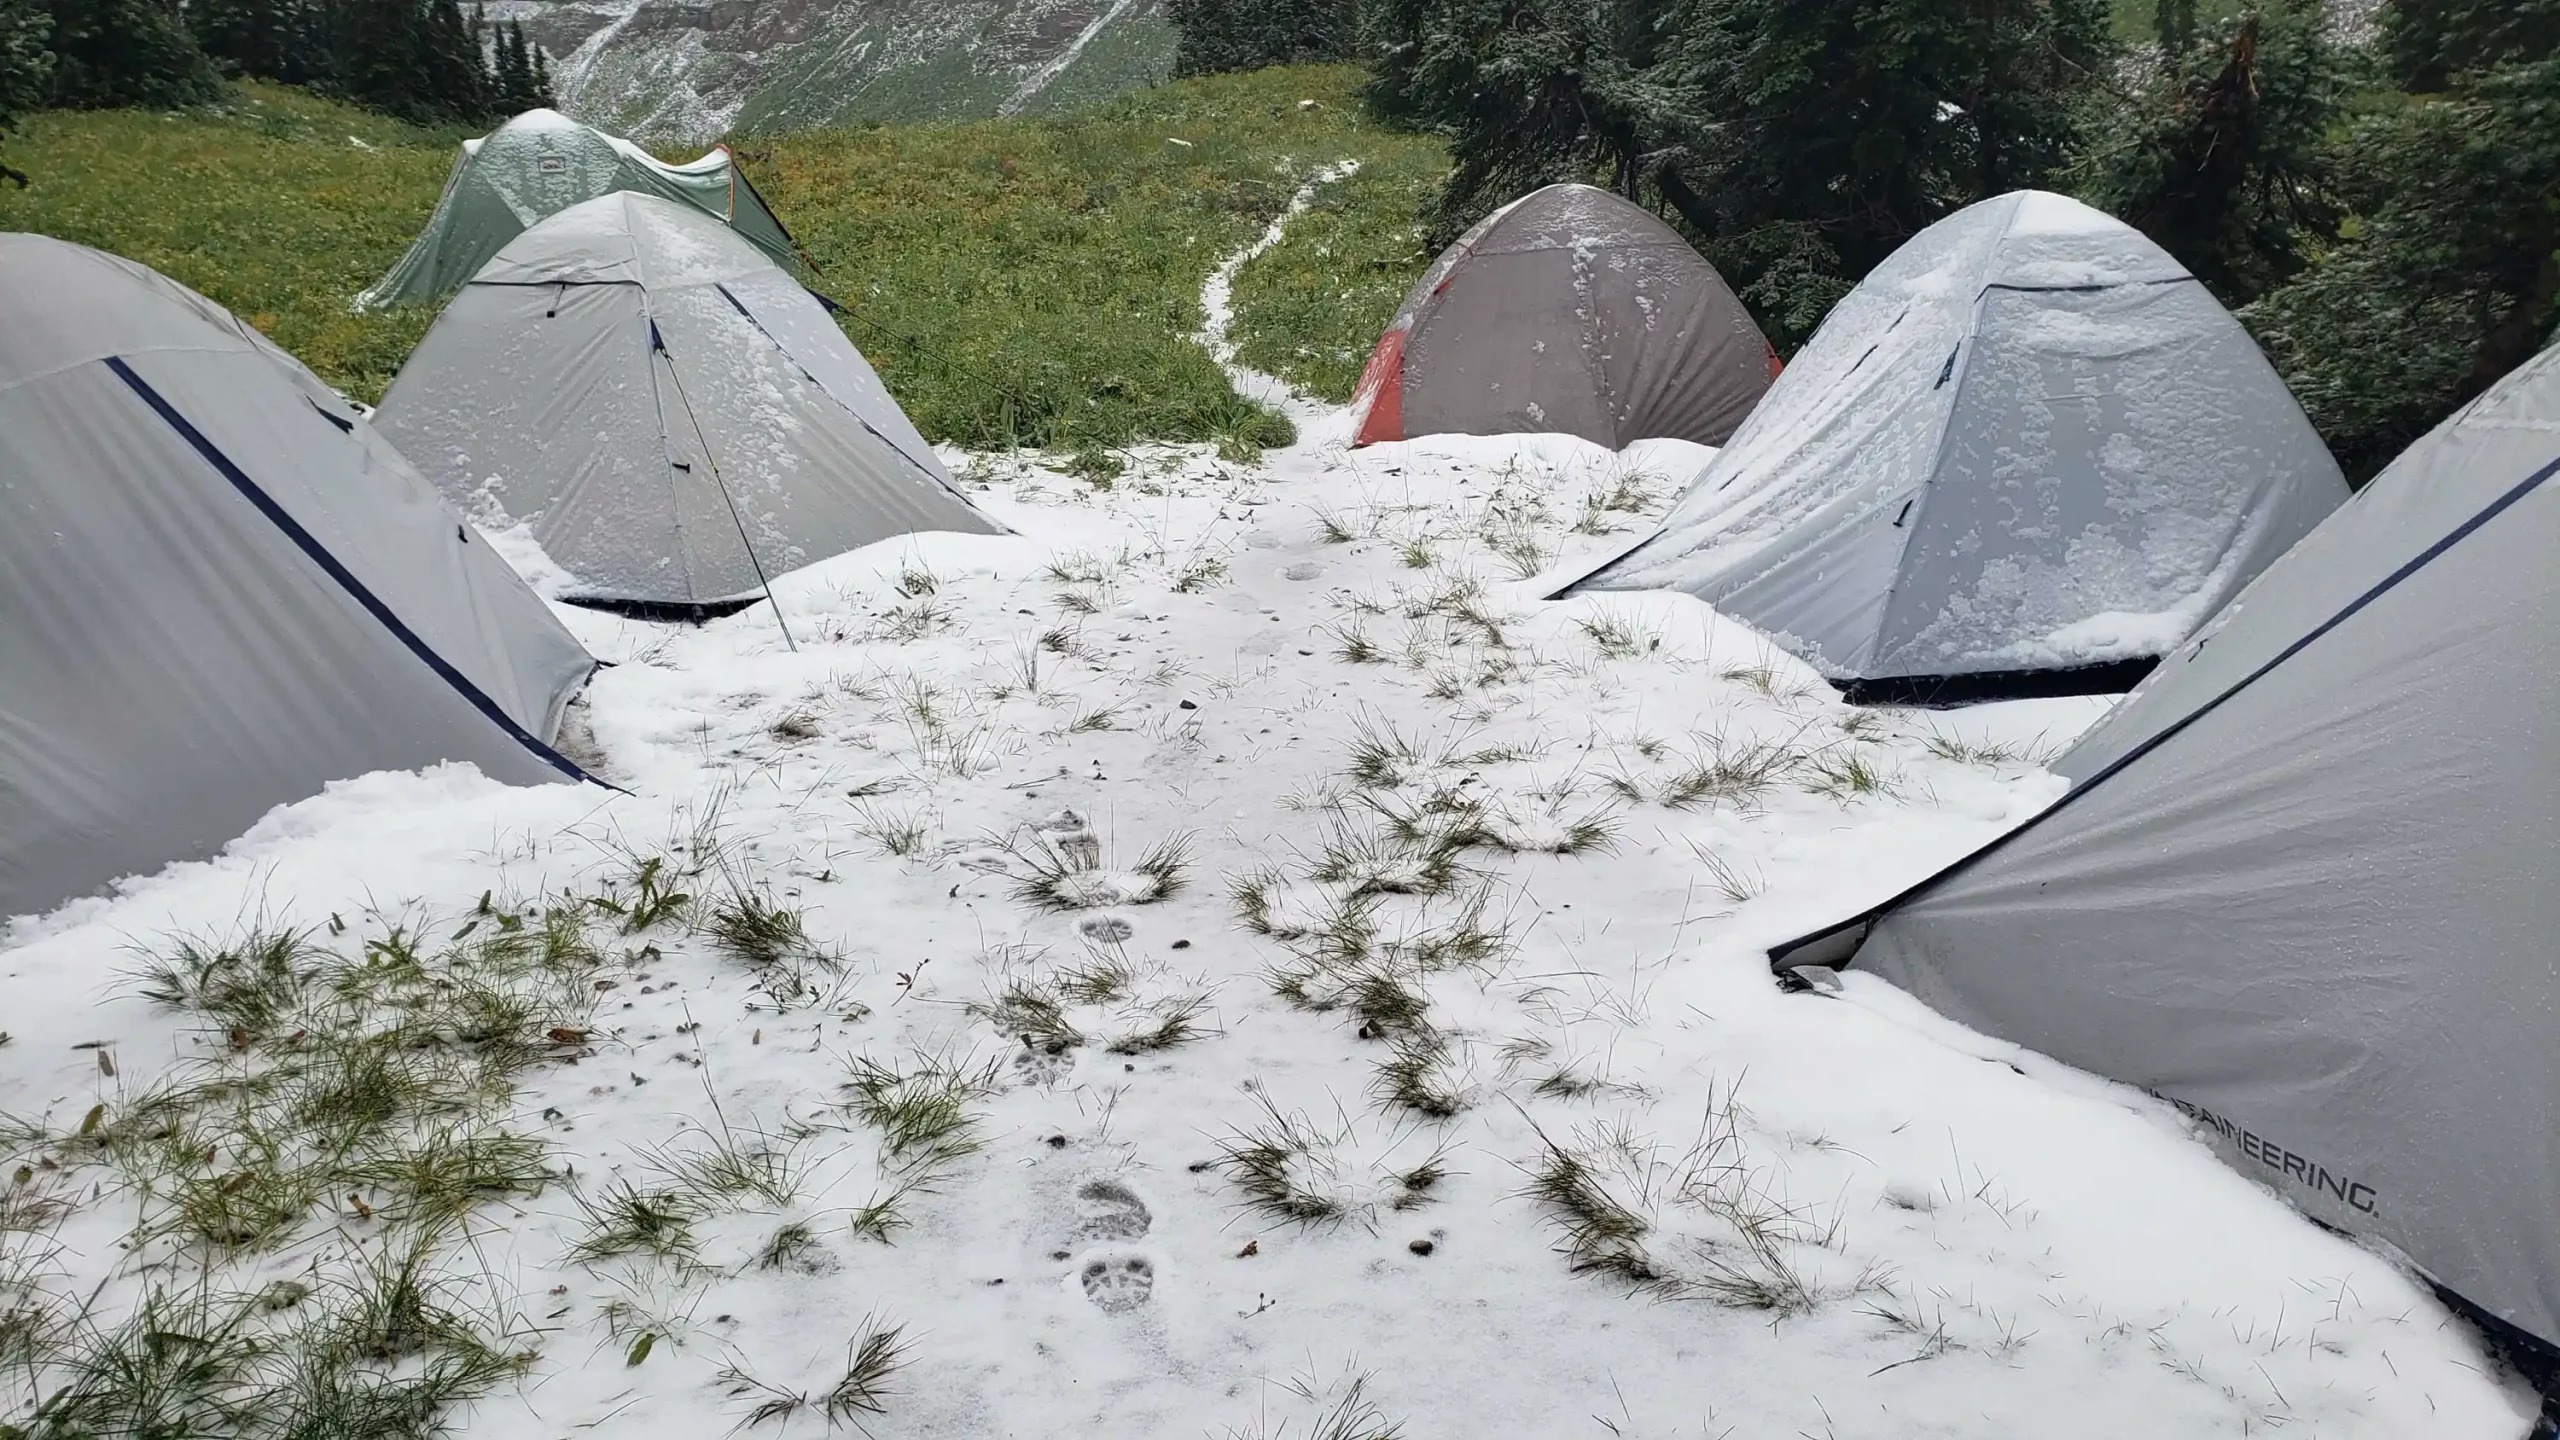 Snow on tents at high camp